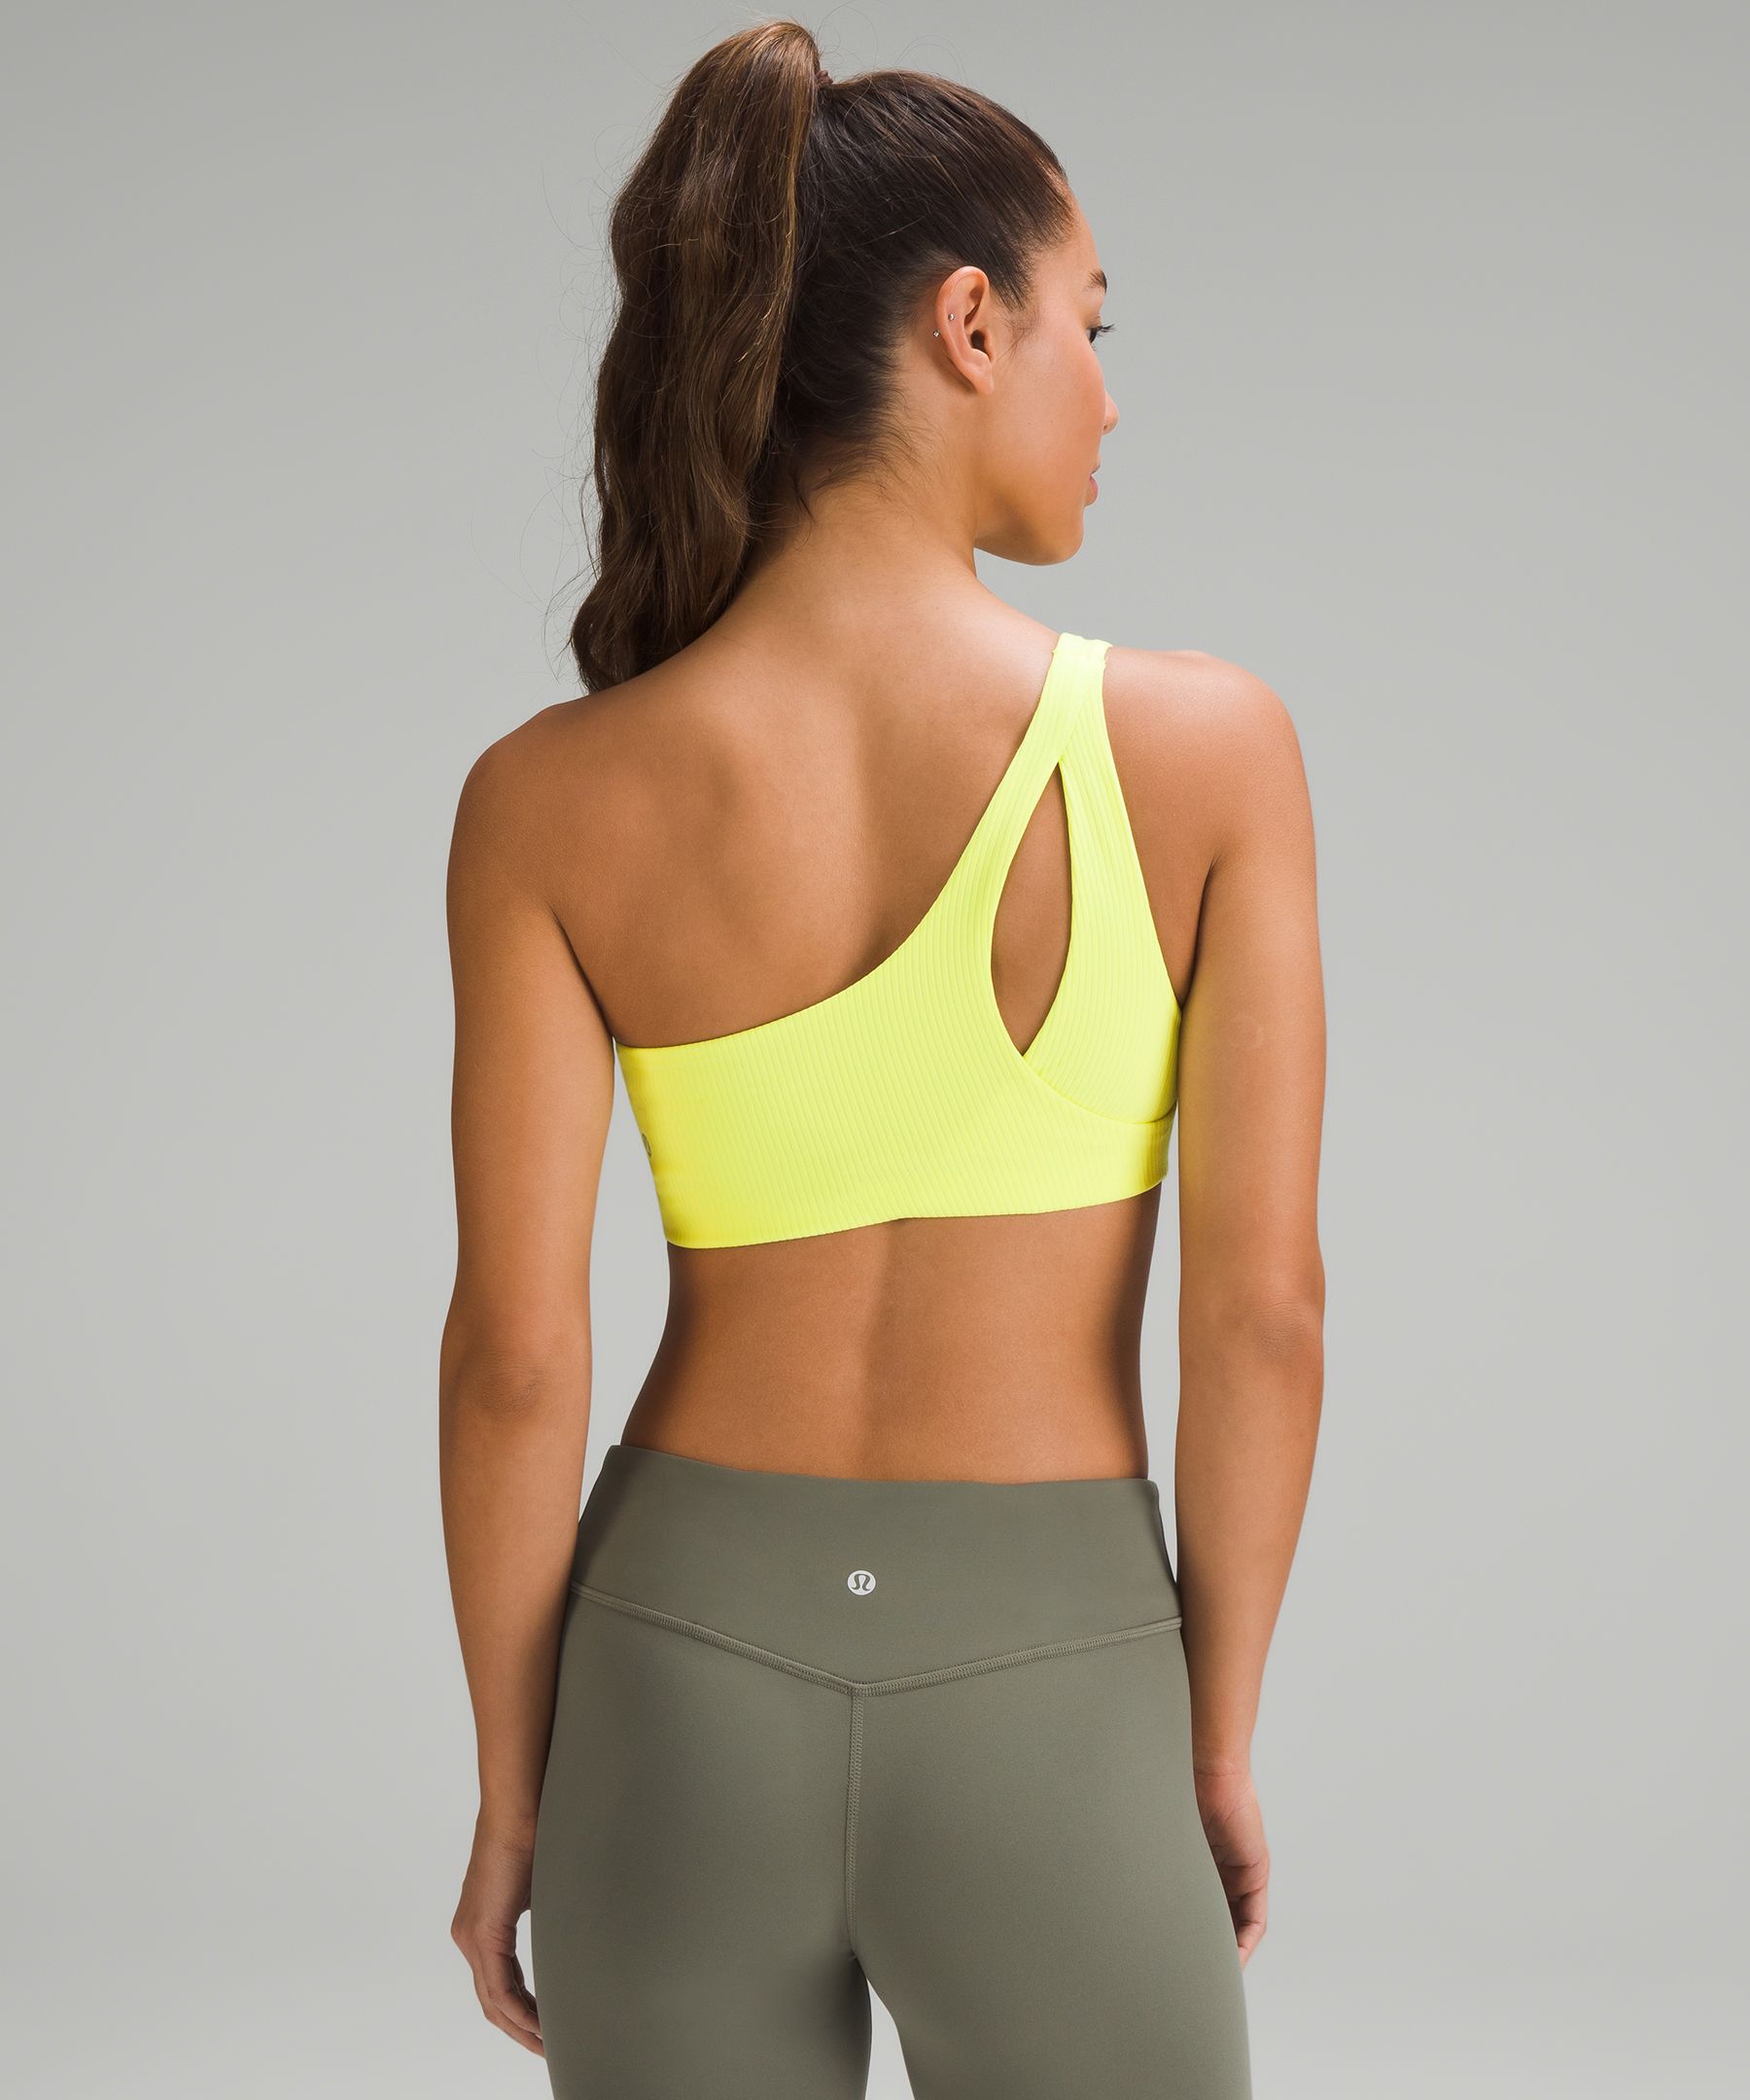 Lululemon athletica SmoothCover Yoga Bra *Light Support, B/C Cup, Women's  Bras